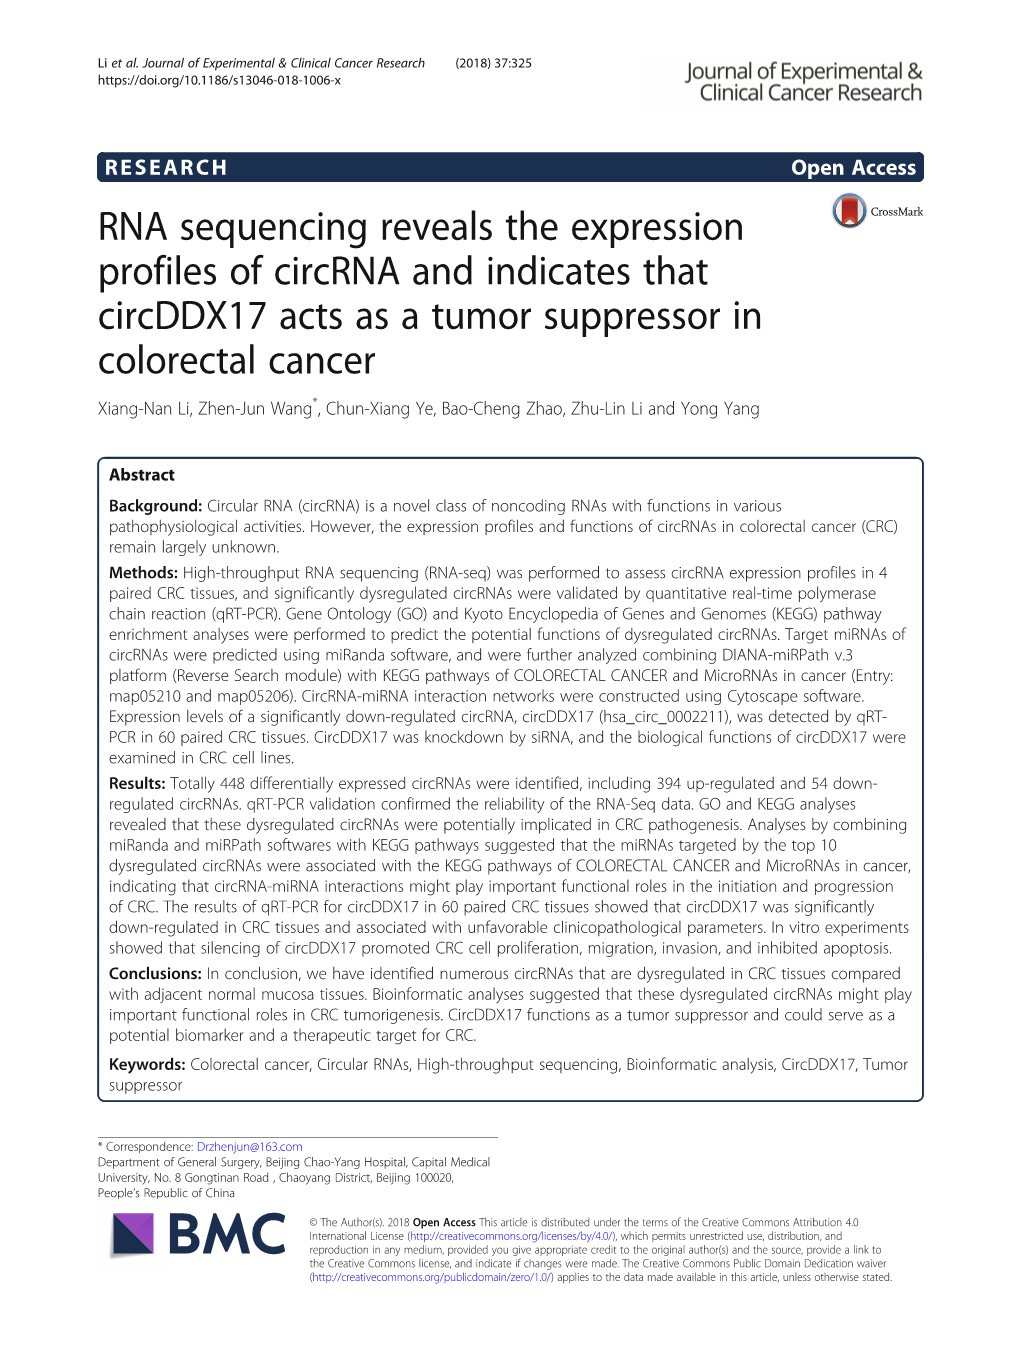 RNA Sequencing Reveals the Expression Profiles of Circrna And